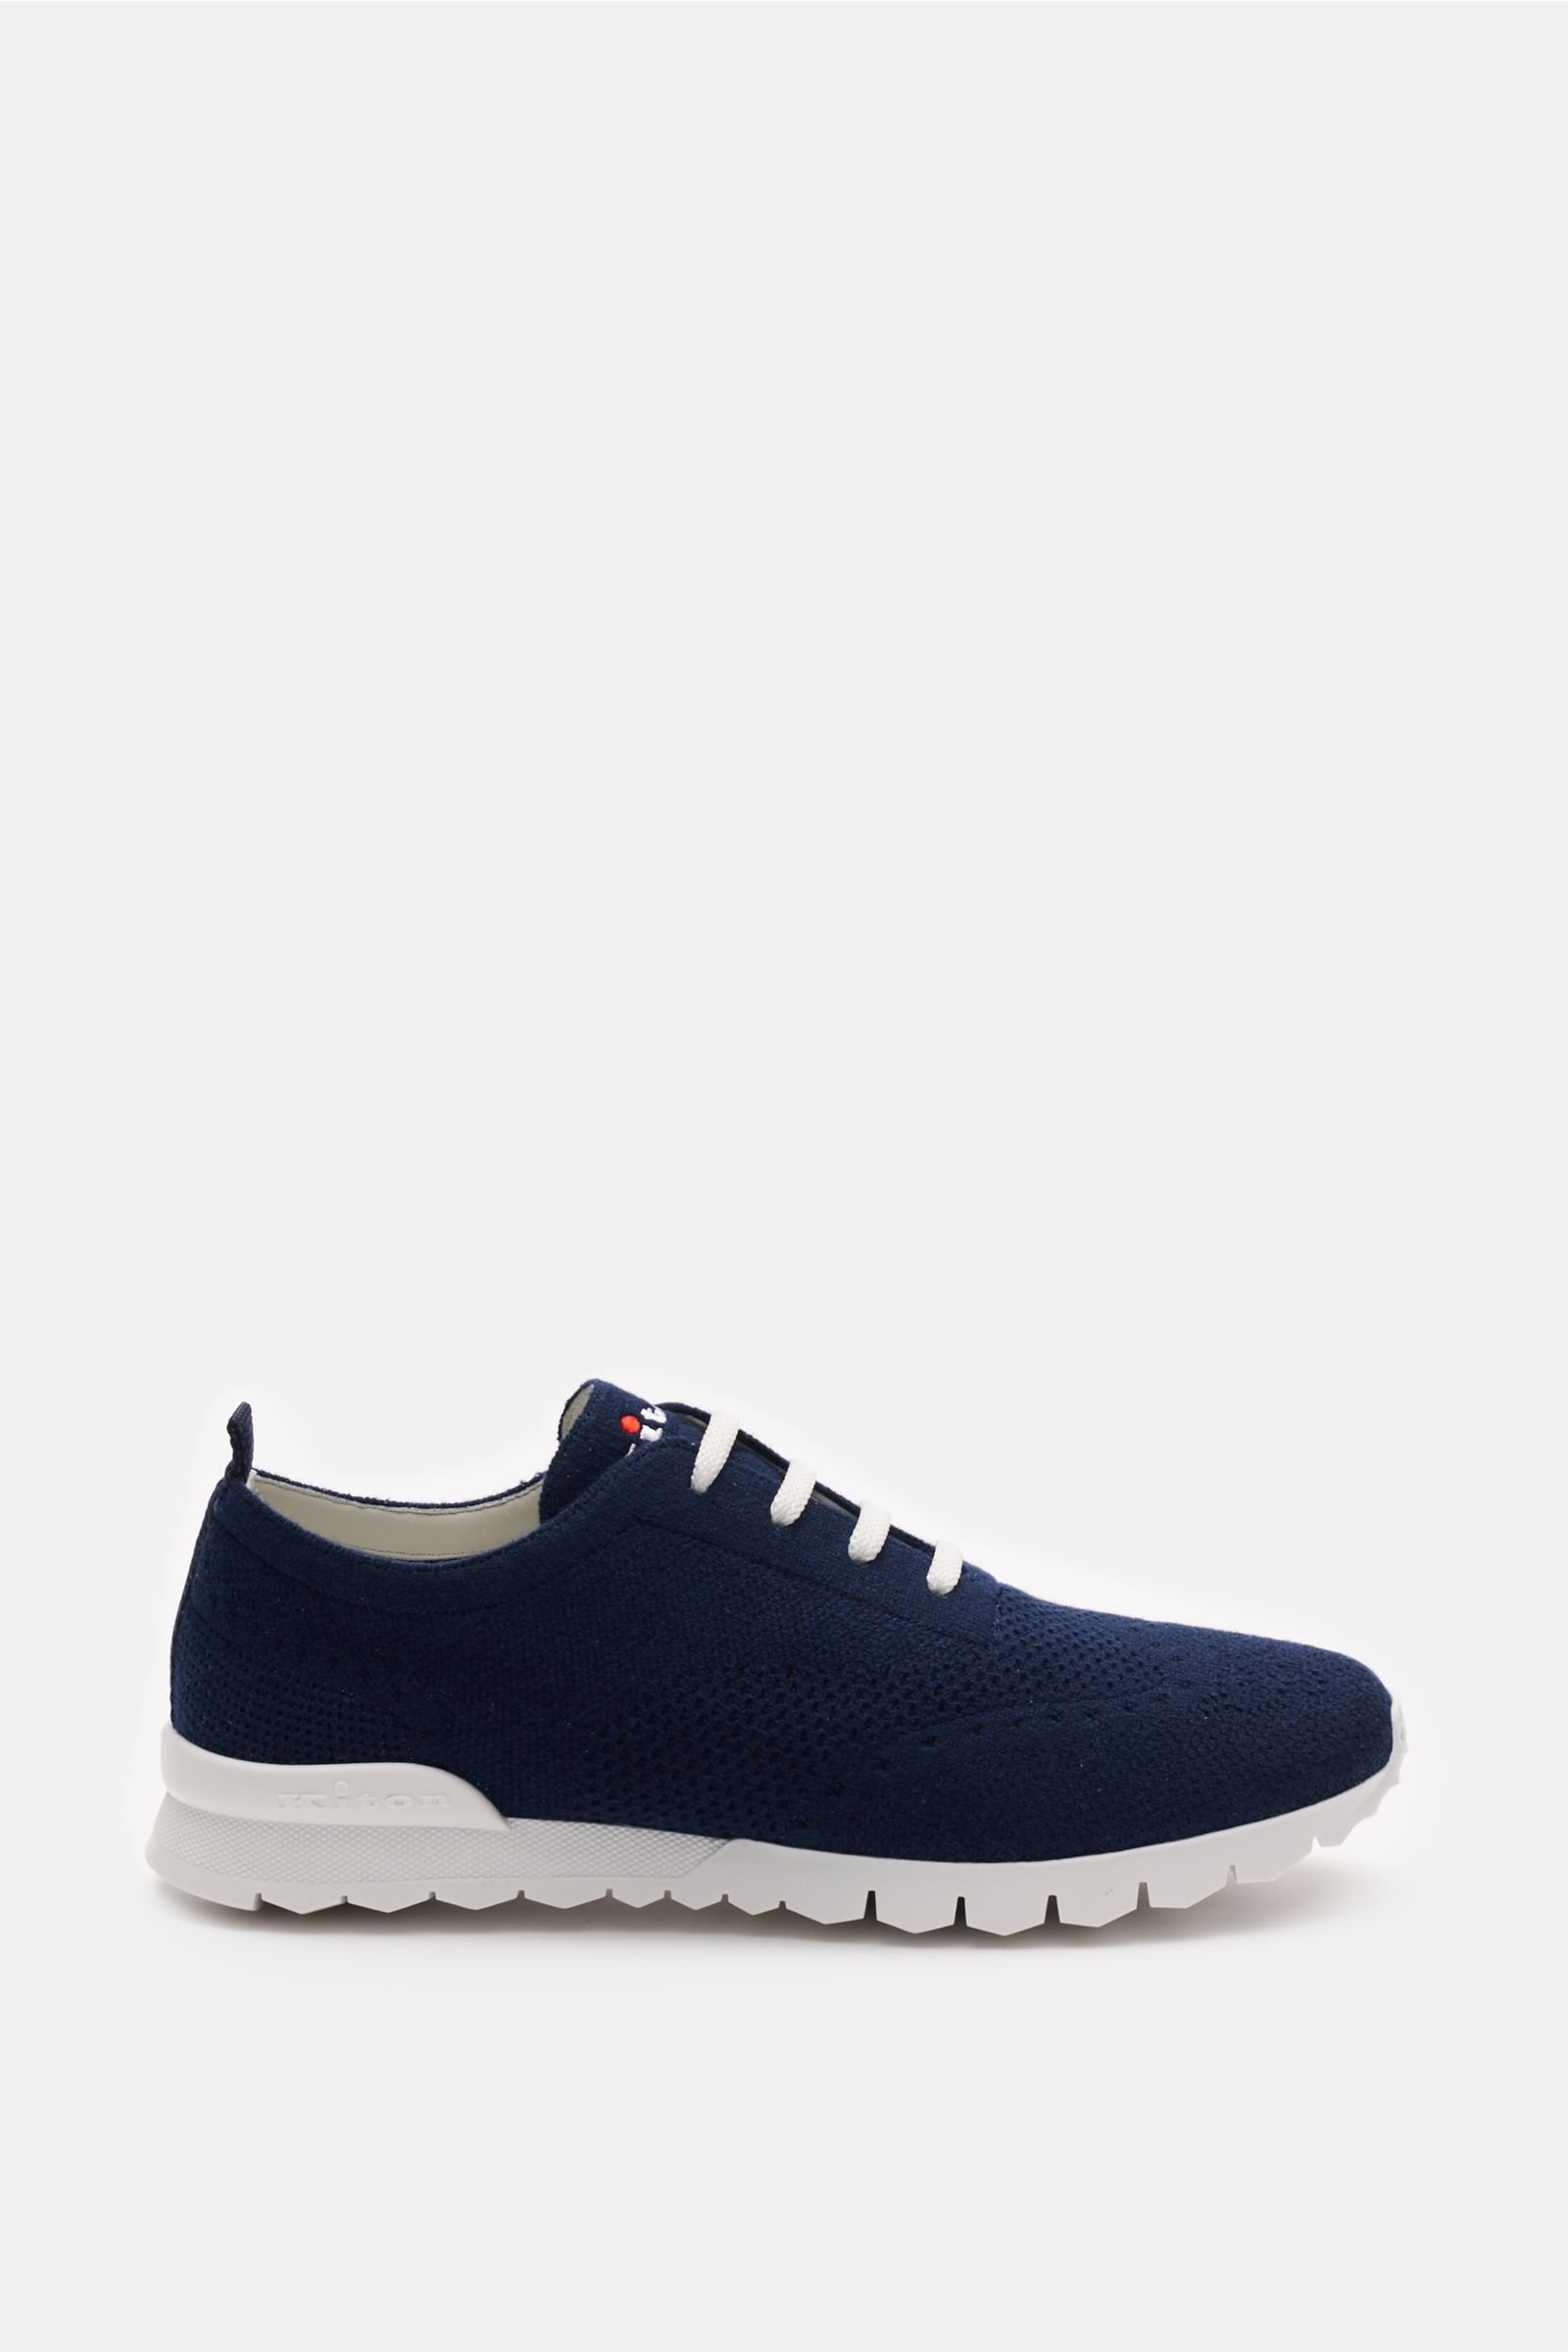 Cashmere Sneaker navy